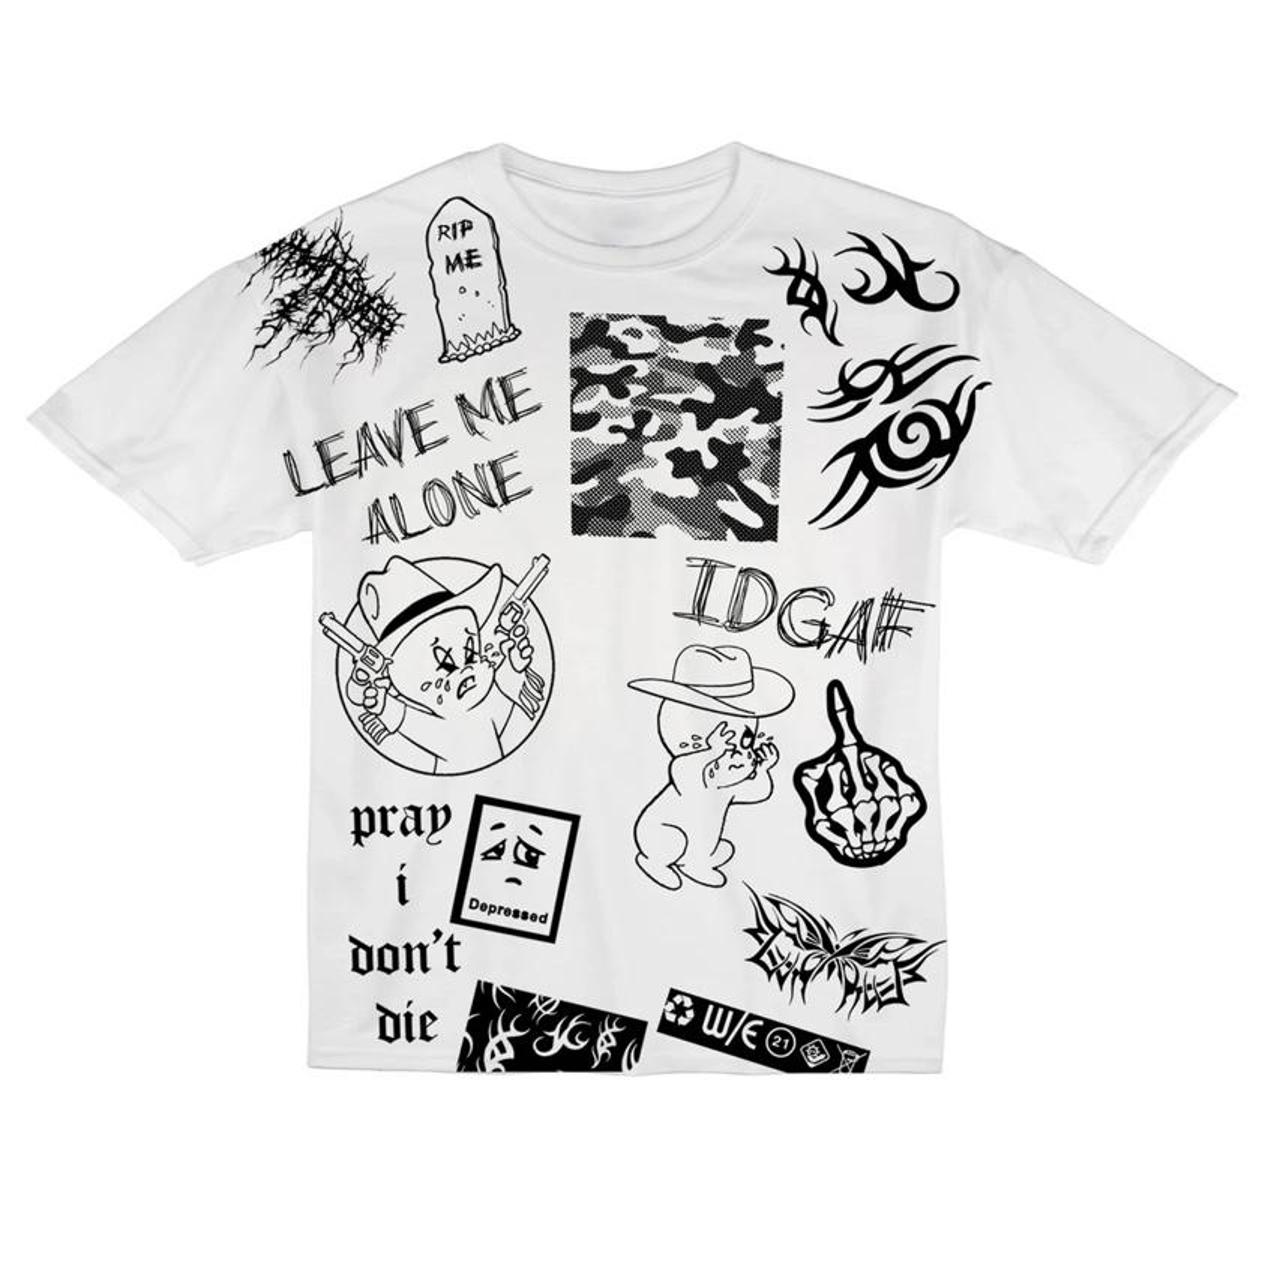 Product Image 1 - LEAVE ME ALONE White Tee

100%